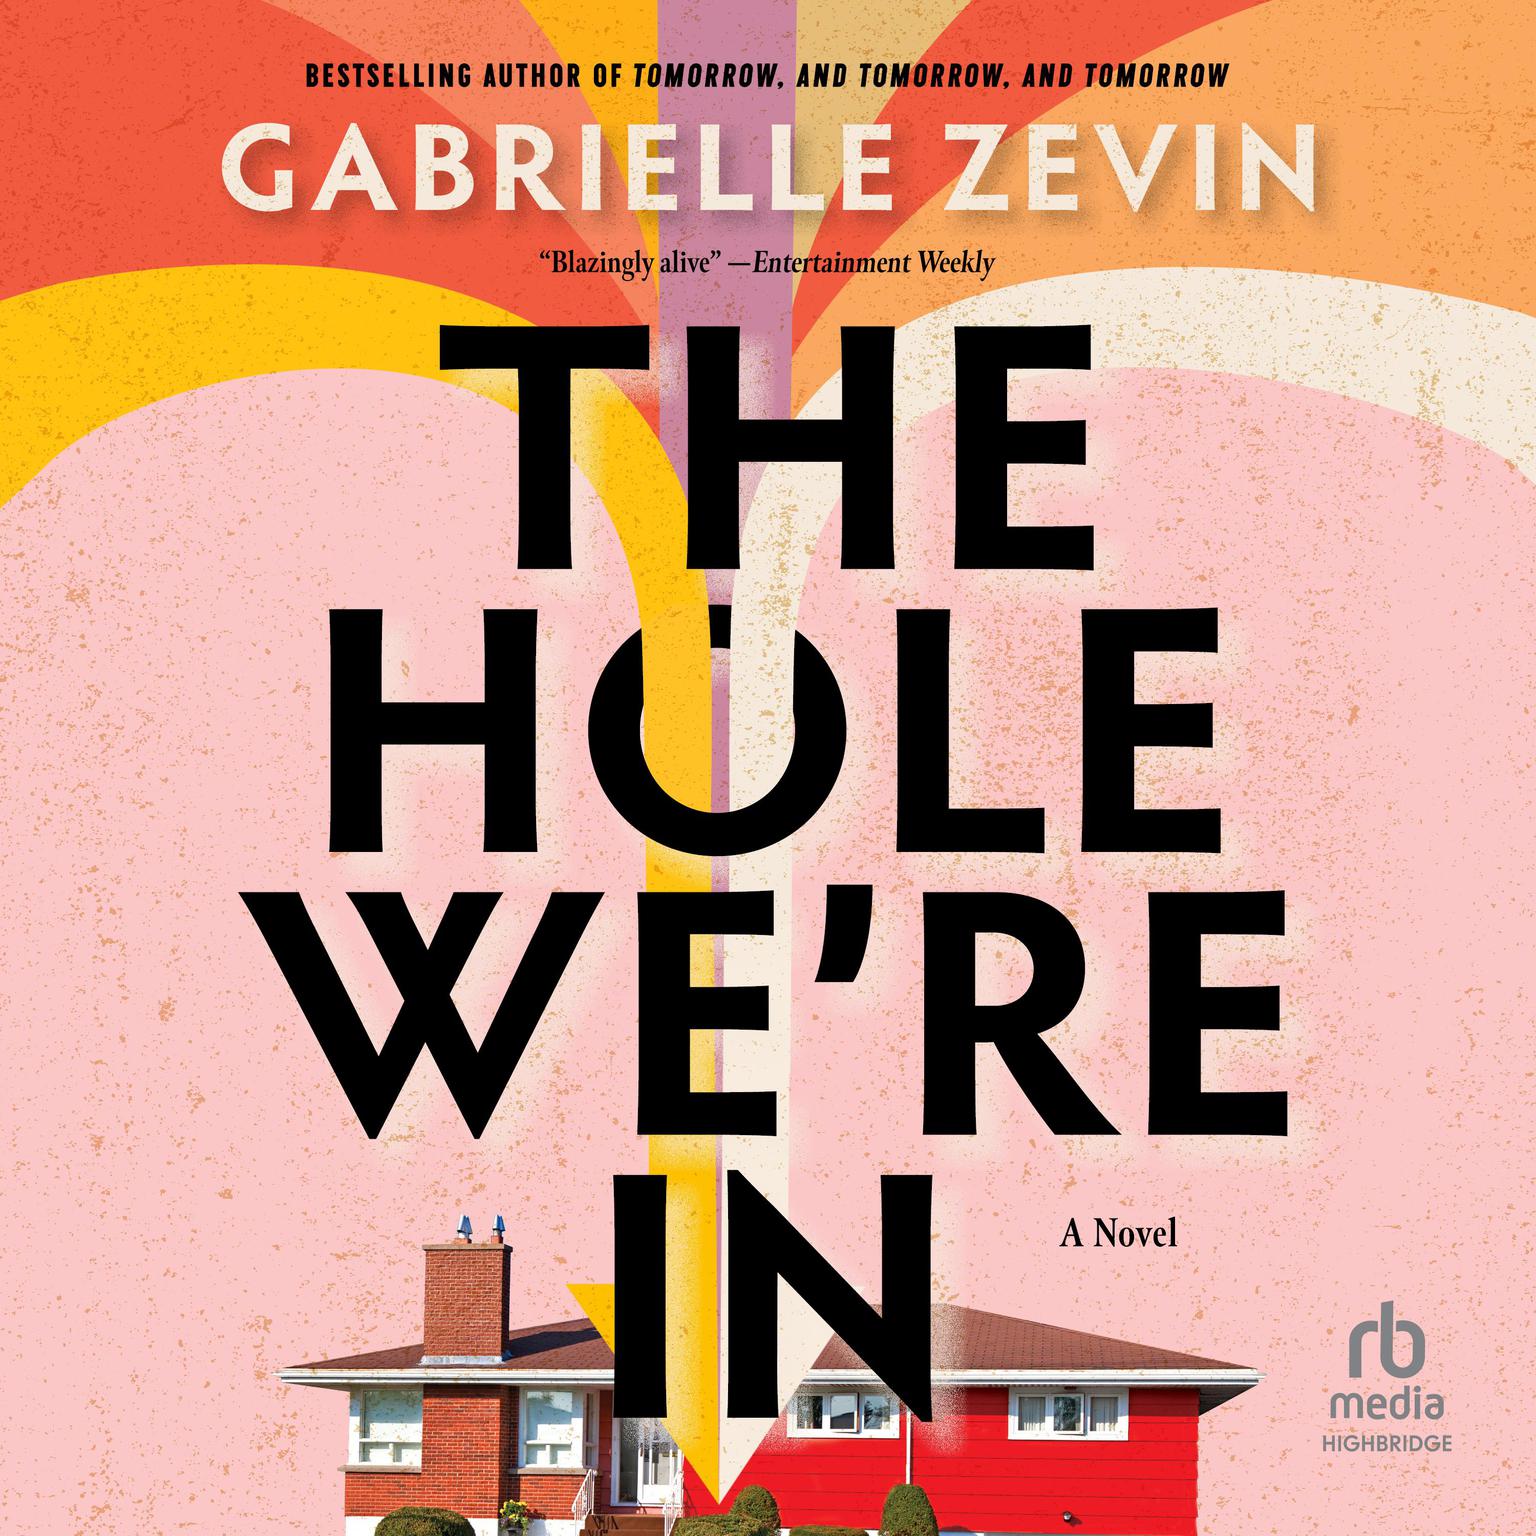 The Hole Were In Audiobook, by Gabrielle Zevin